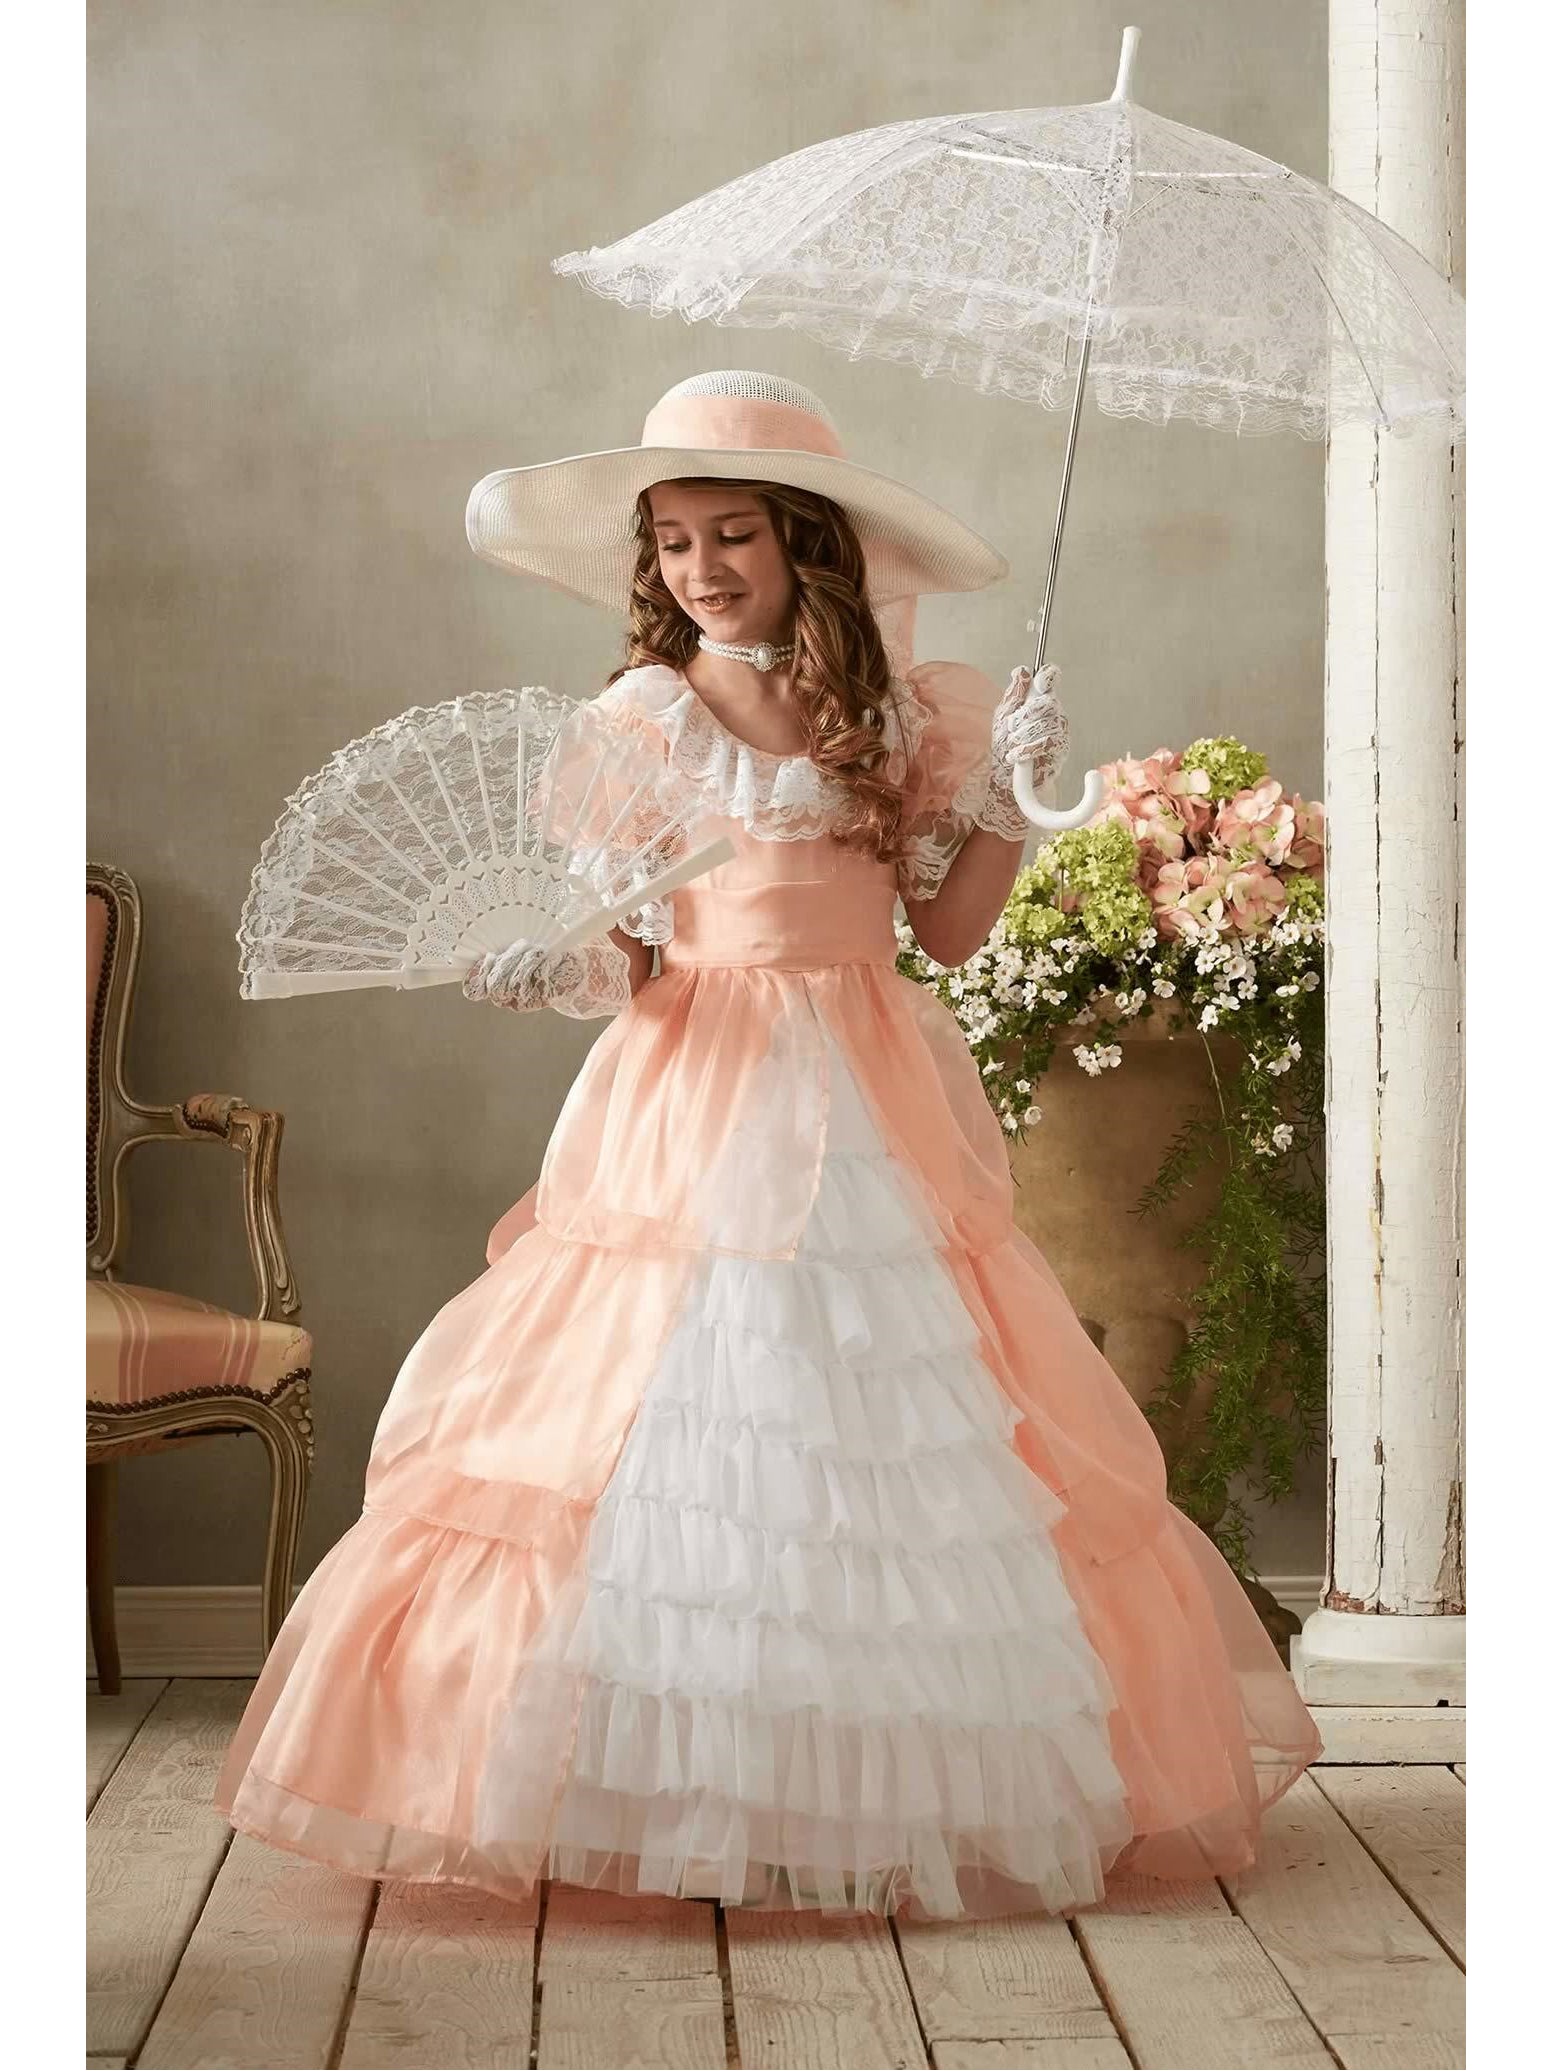 Peachy Southern Belle Costume for Girls  pea alt1